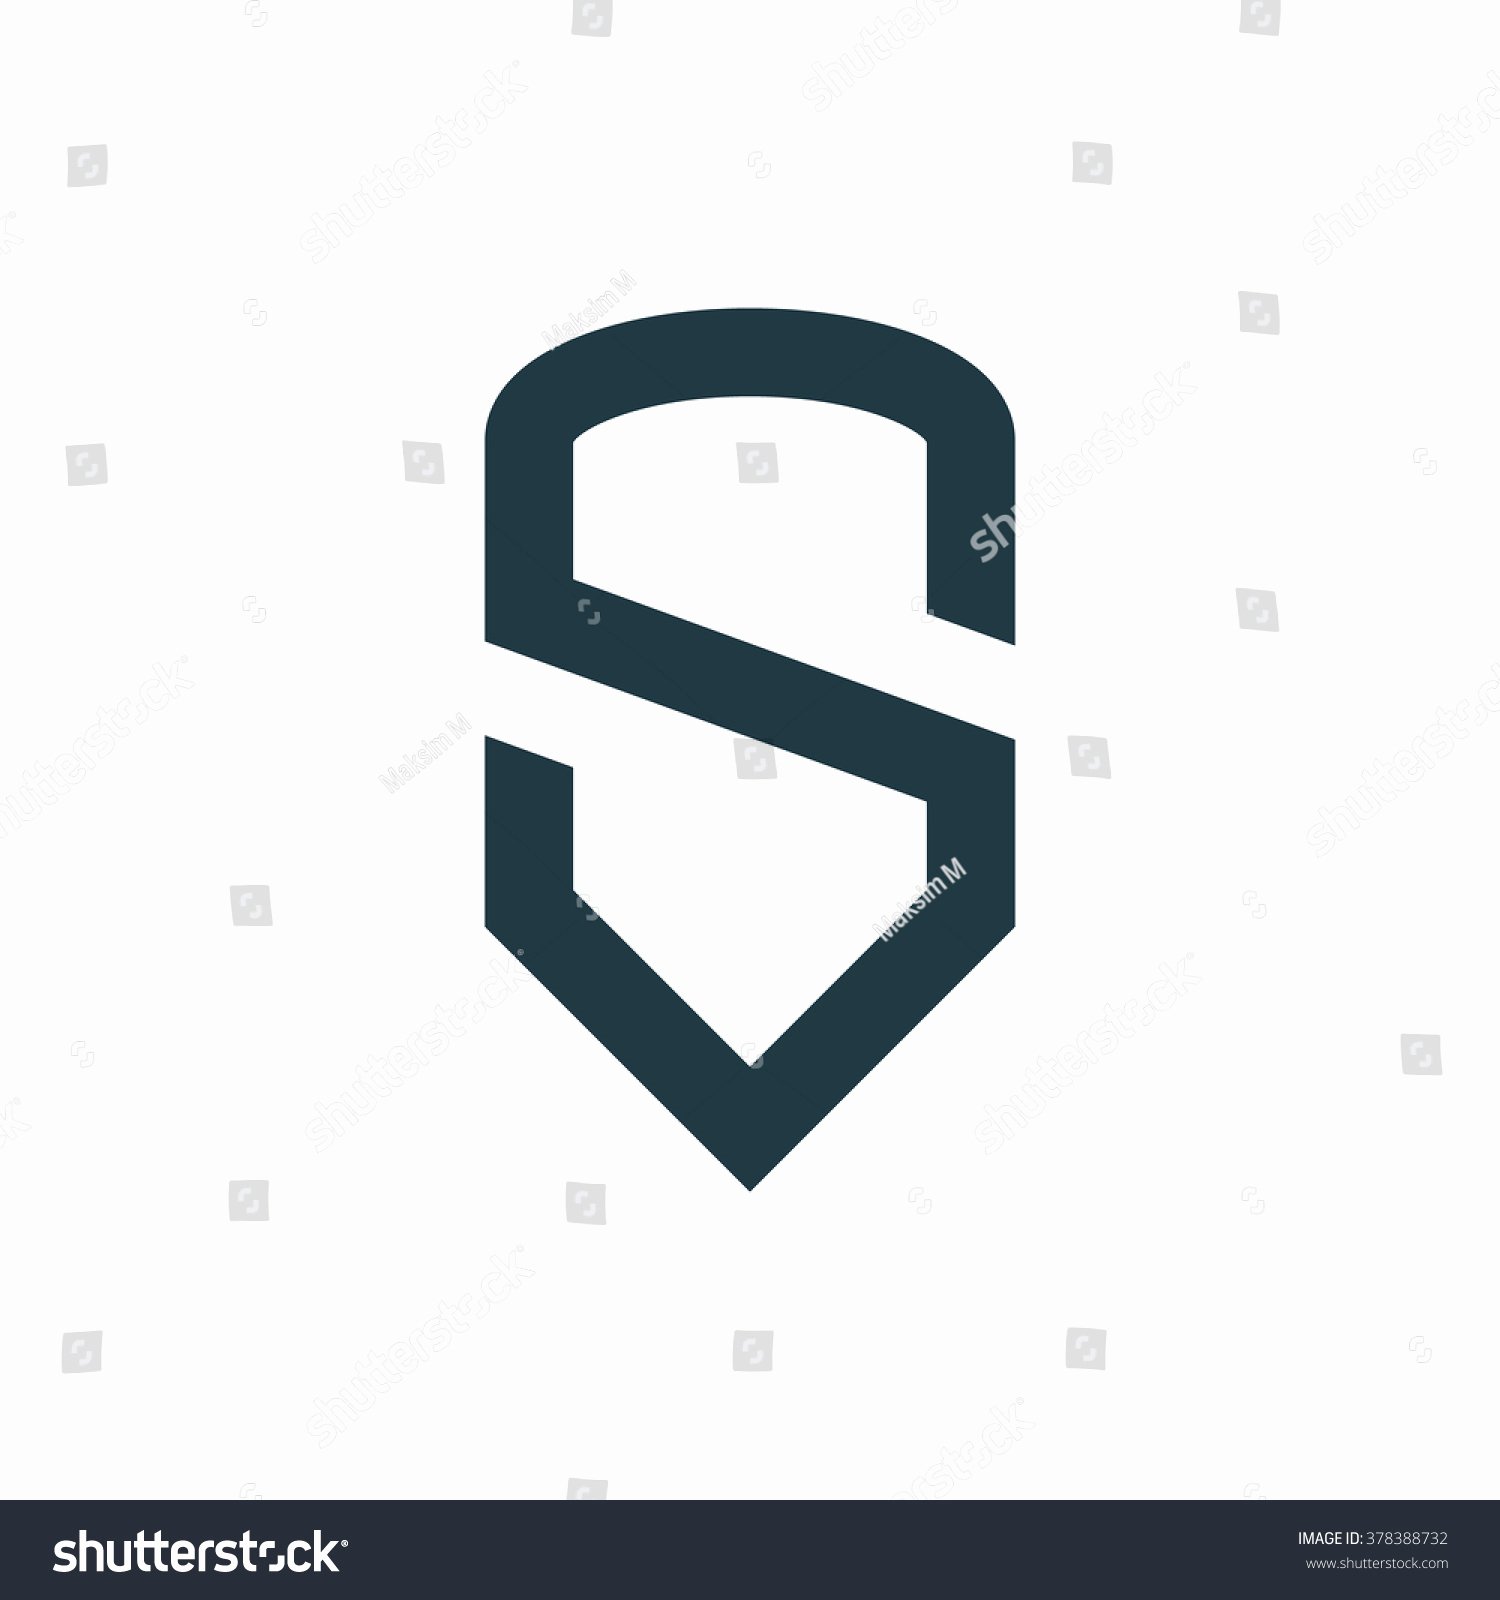 Business Letter Template with Logo Awesome Letter S Logo Template Letter S Stock Illustration